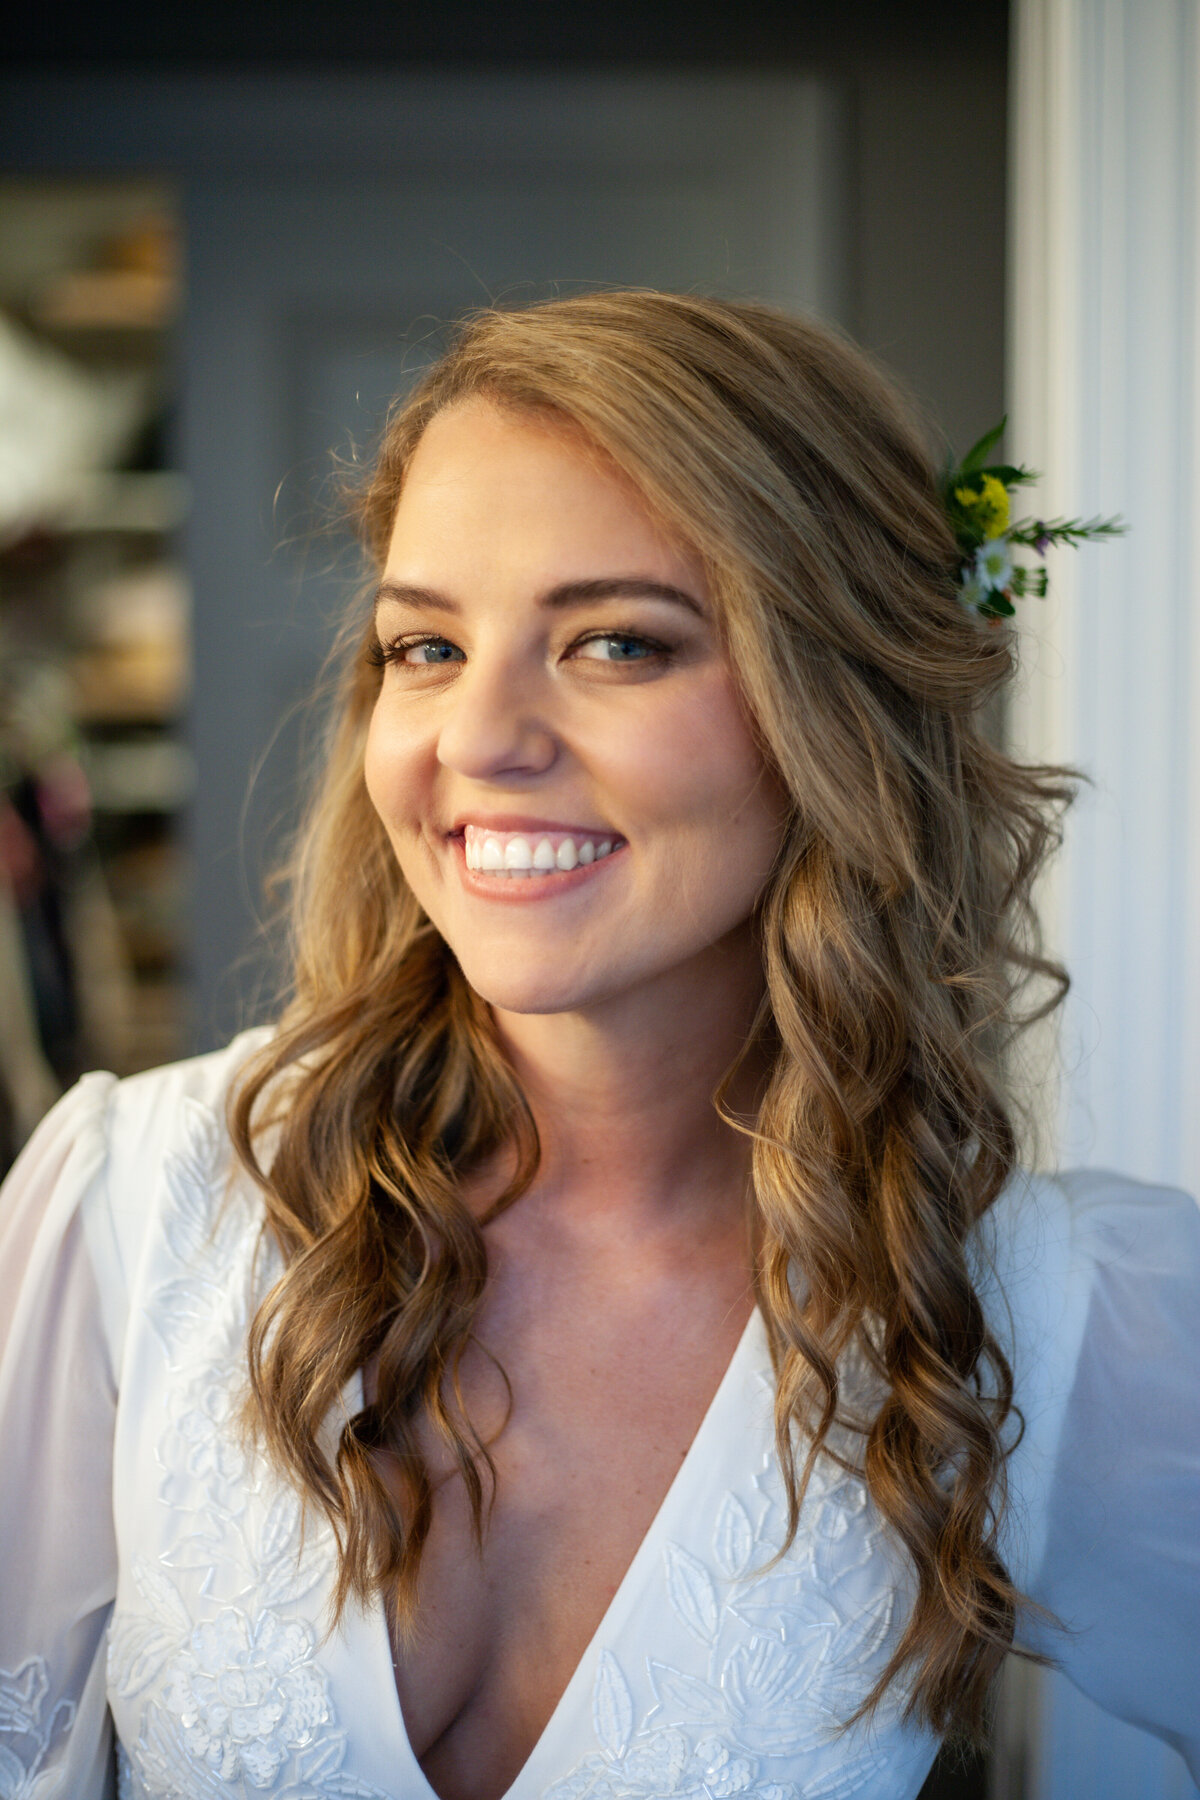 A girl wearing a white dress with sprigs of flowers in her curled hair